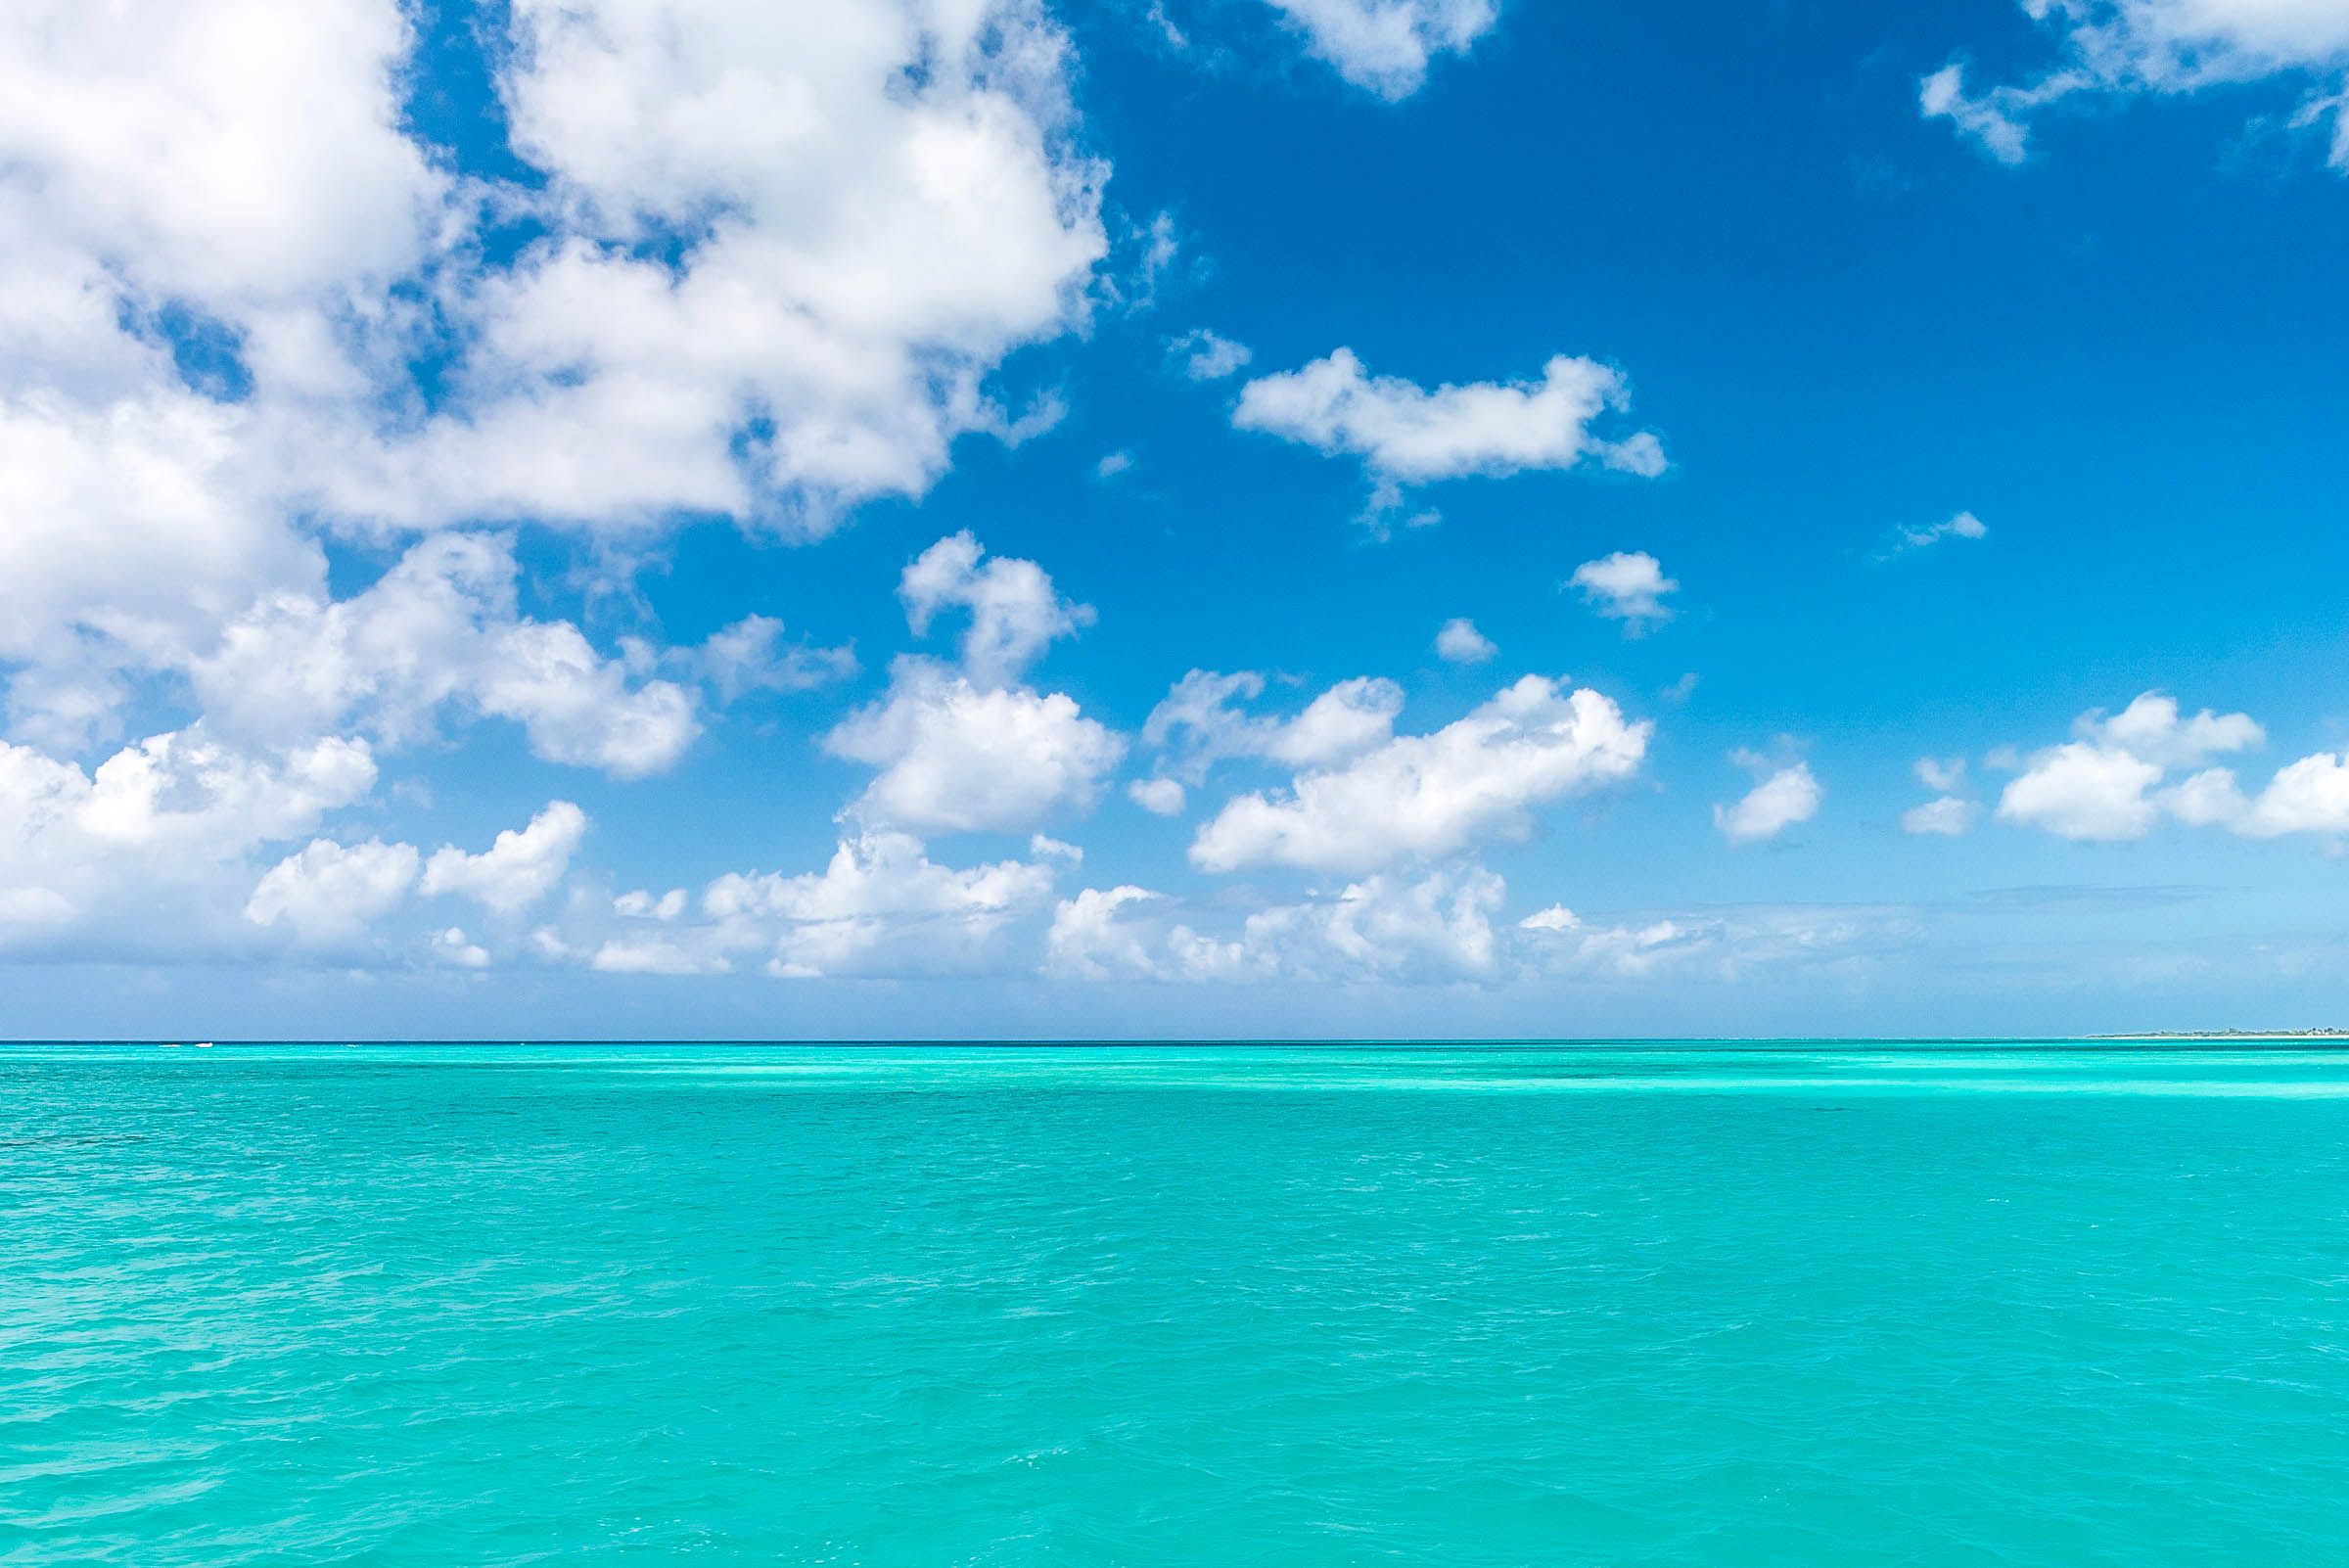 Turks And Caicos Islands Wallpapers Wallpaper Cave